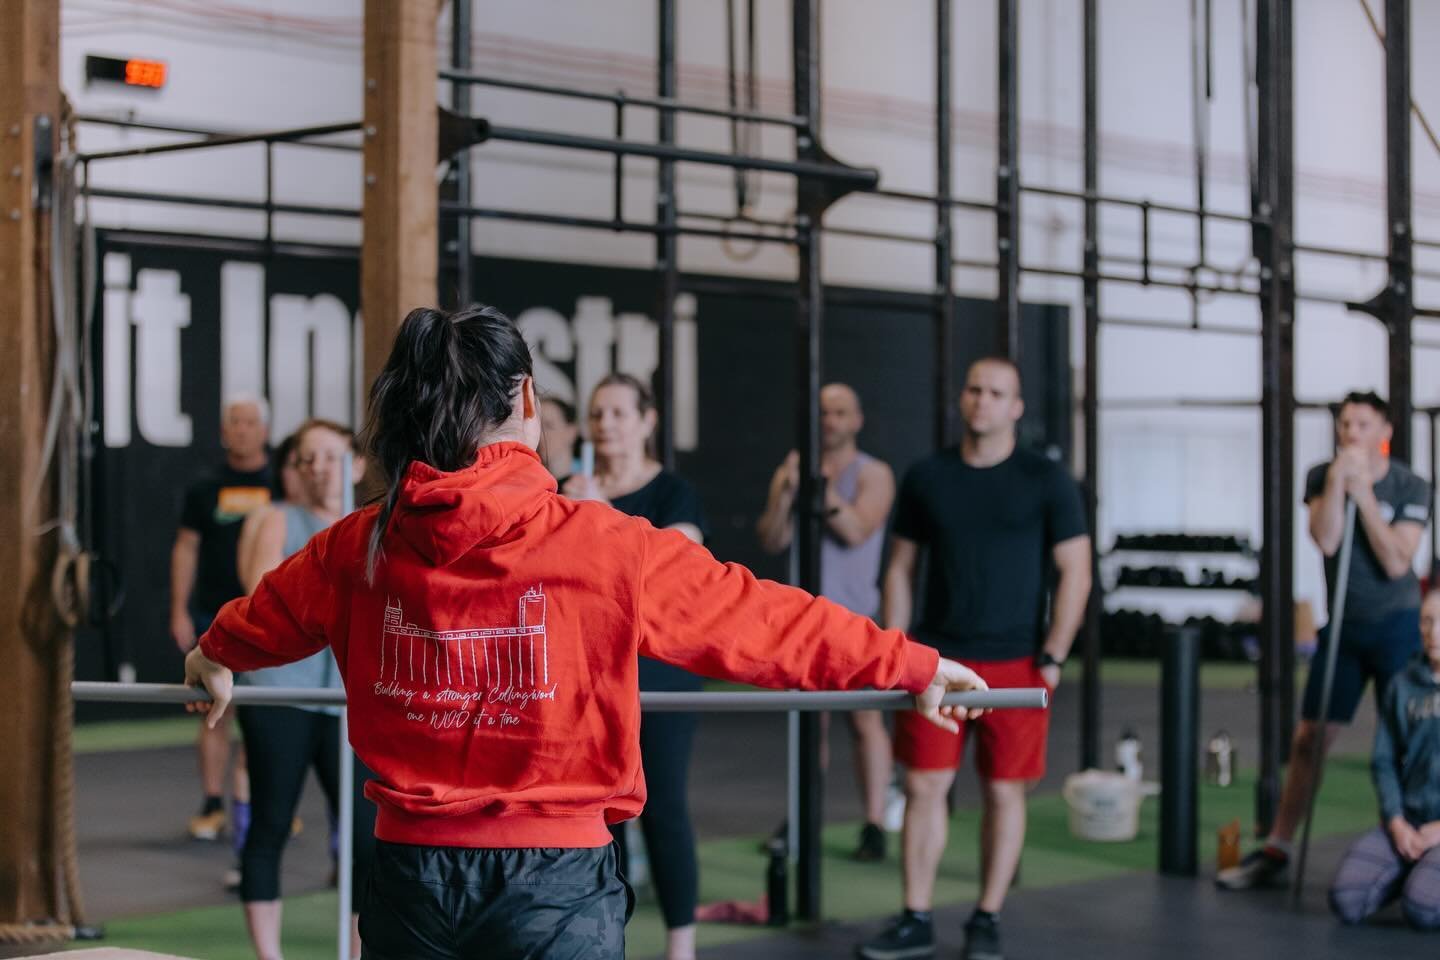 We&rsquo;re doing all the right things, for all the right people, for all the right reasons. And it&rsquo;s a load of fun. - Coach Greg Glassman.

#CrossFitIndestri
#indestriSTRONG
#weINDESTRUCTIBLE
#CrossFit
#CrossFitCanada
#Collingwood
#OURCommunit